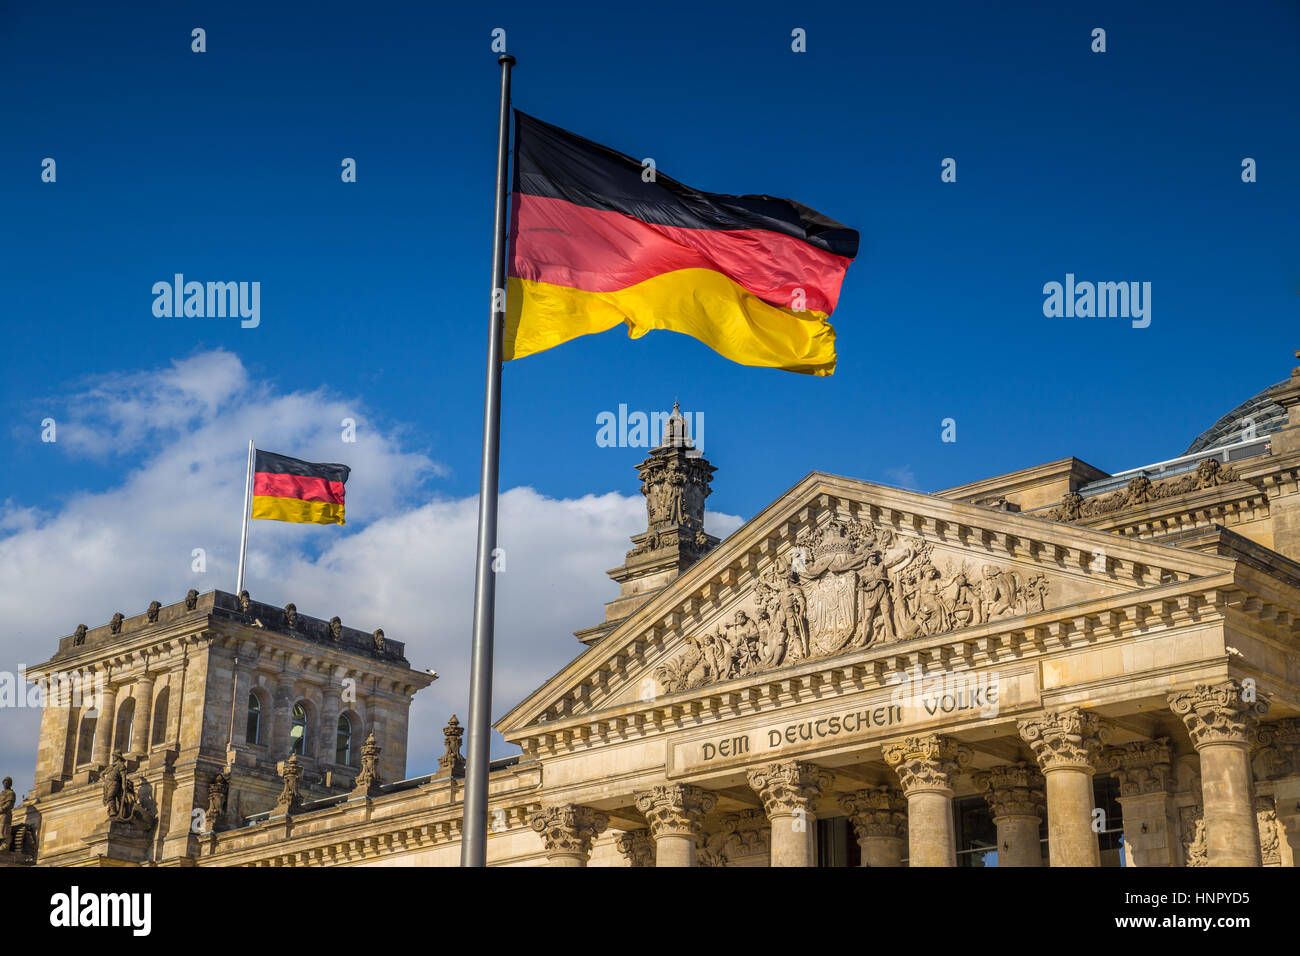 German flags waving in the wind at famous Reichstag building, seat of the German Parliament, on a sunny day with blue sky, Berlin Mitte, Germany Stock Photo